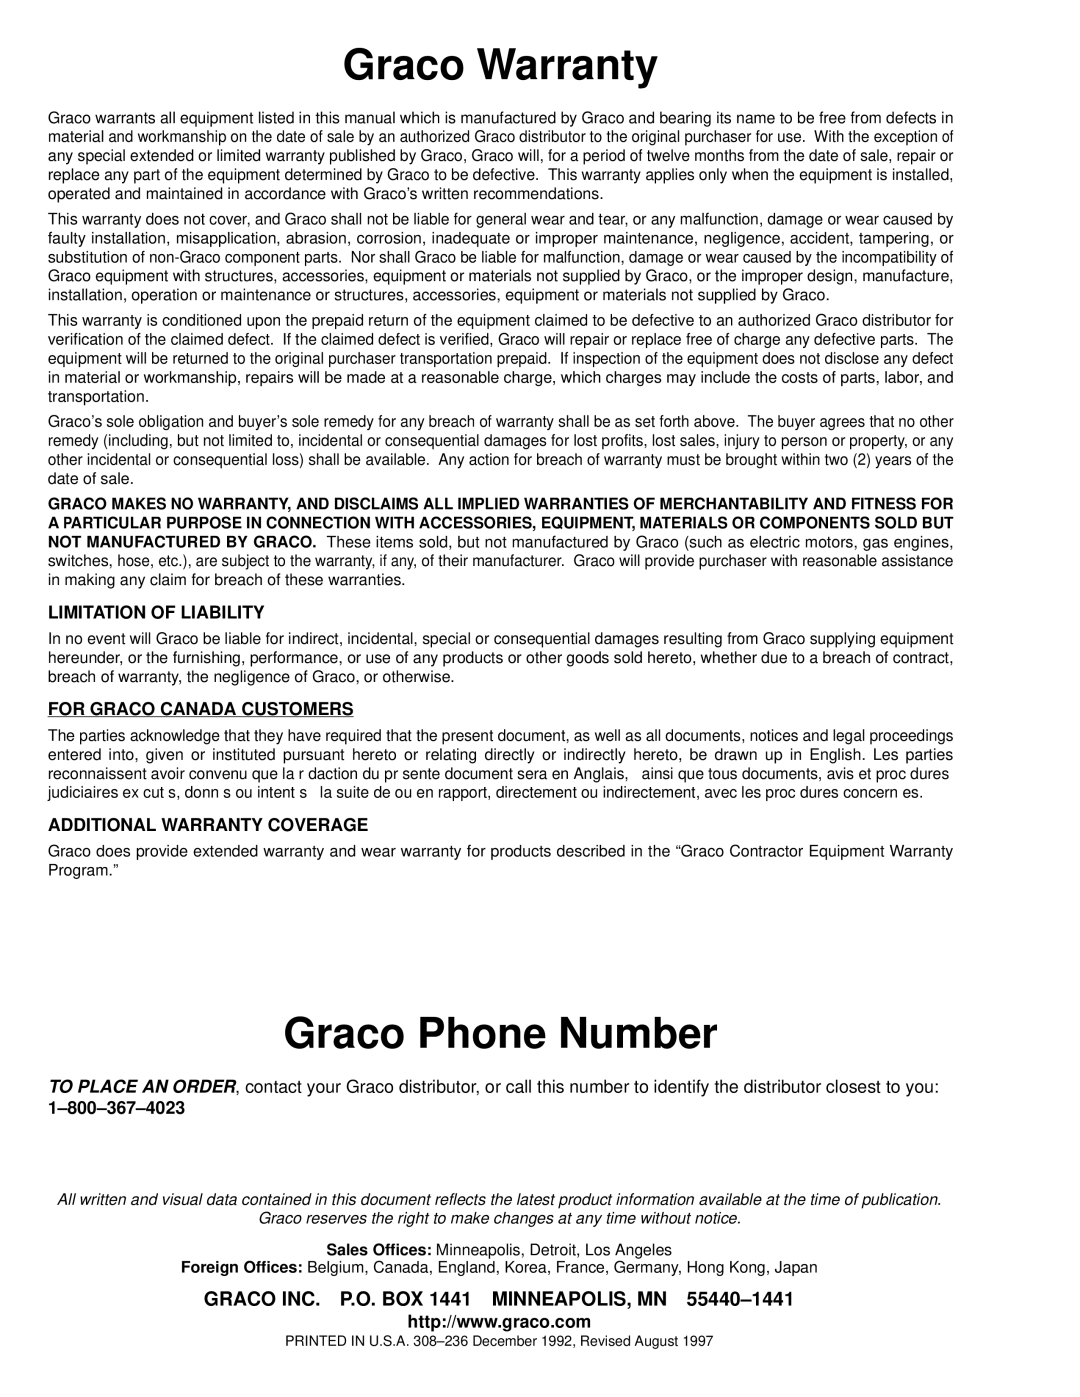 Graco Inc 235-463, 308-236, 237-695 Graco Warranty, Graco Phone Number, Limitation of Liability, For Graco Canada Customers 